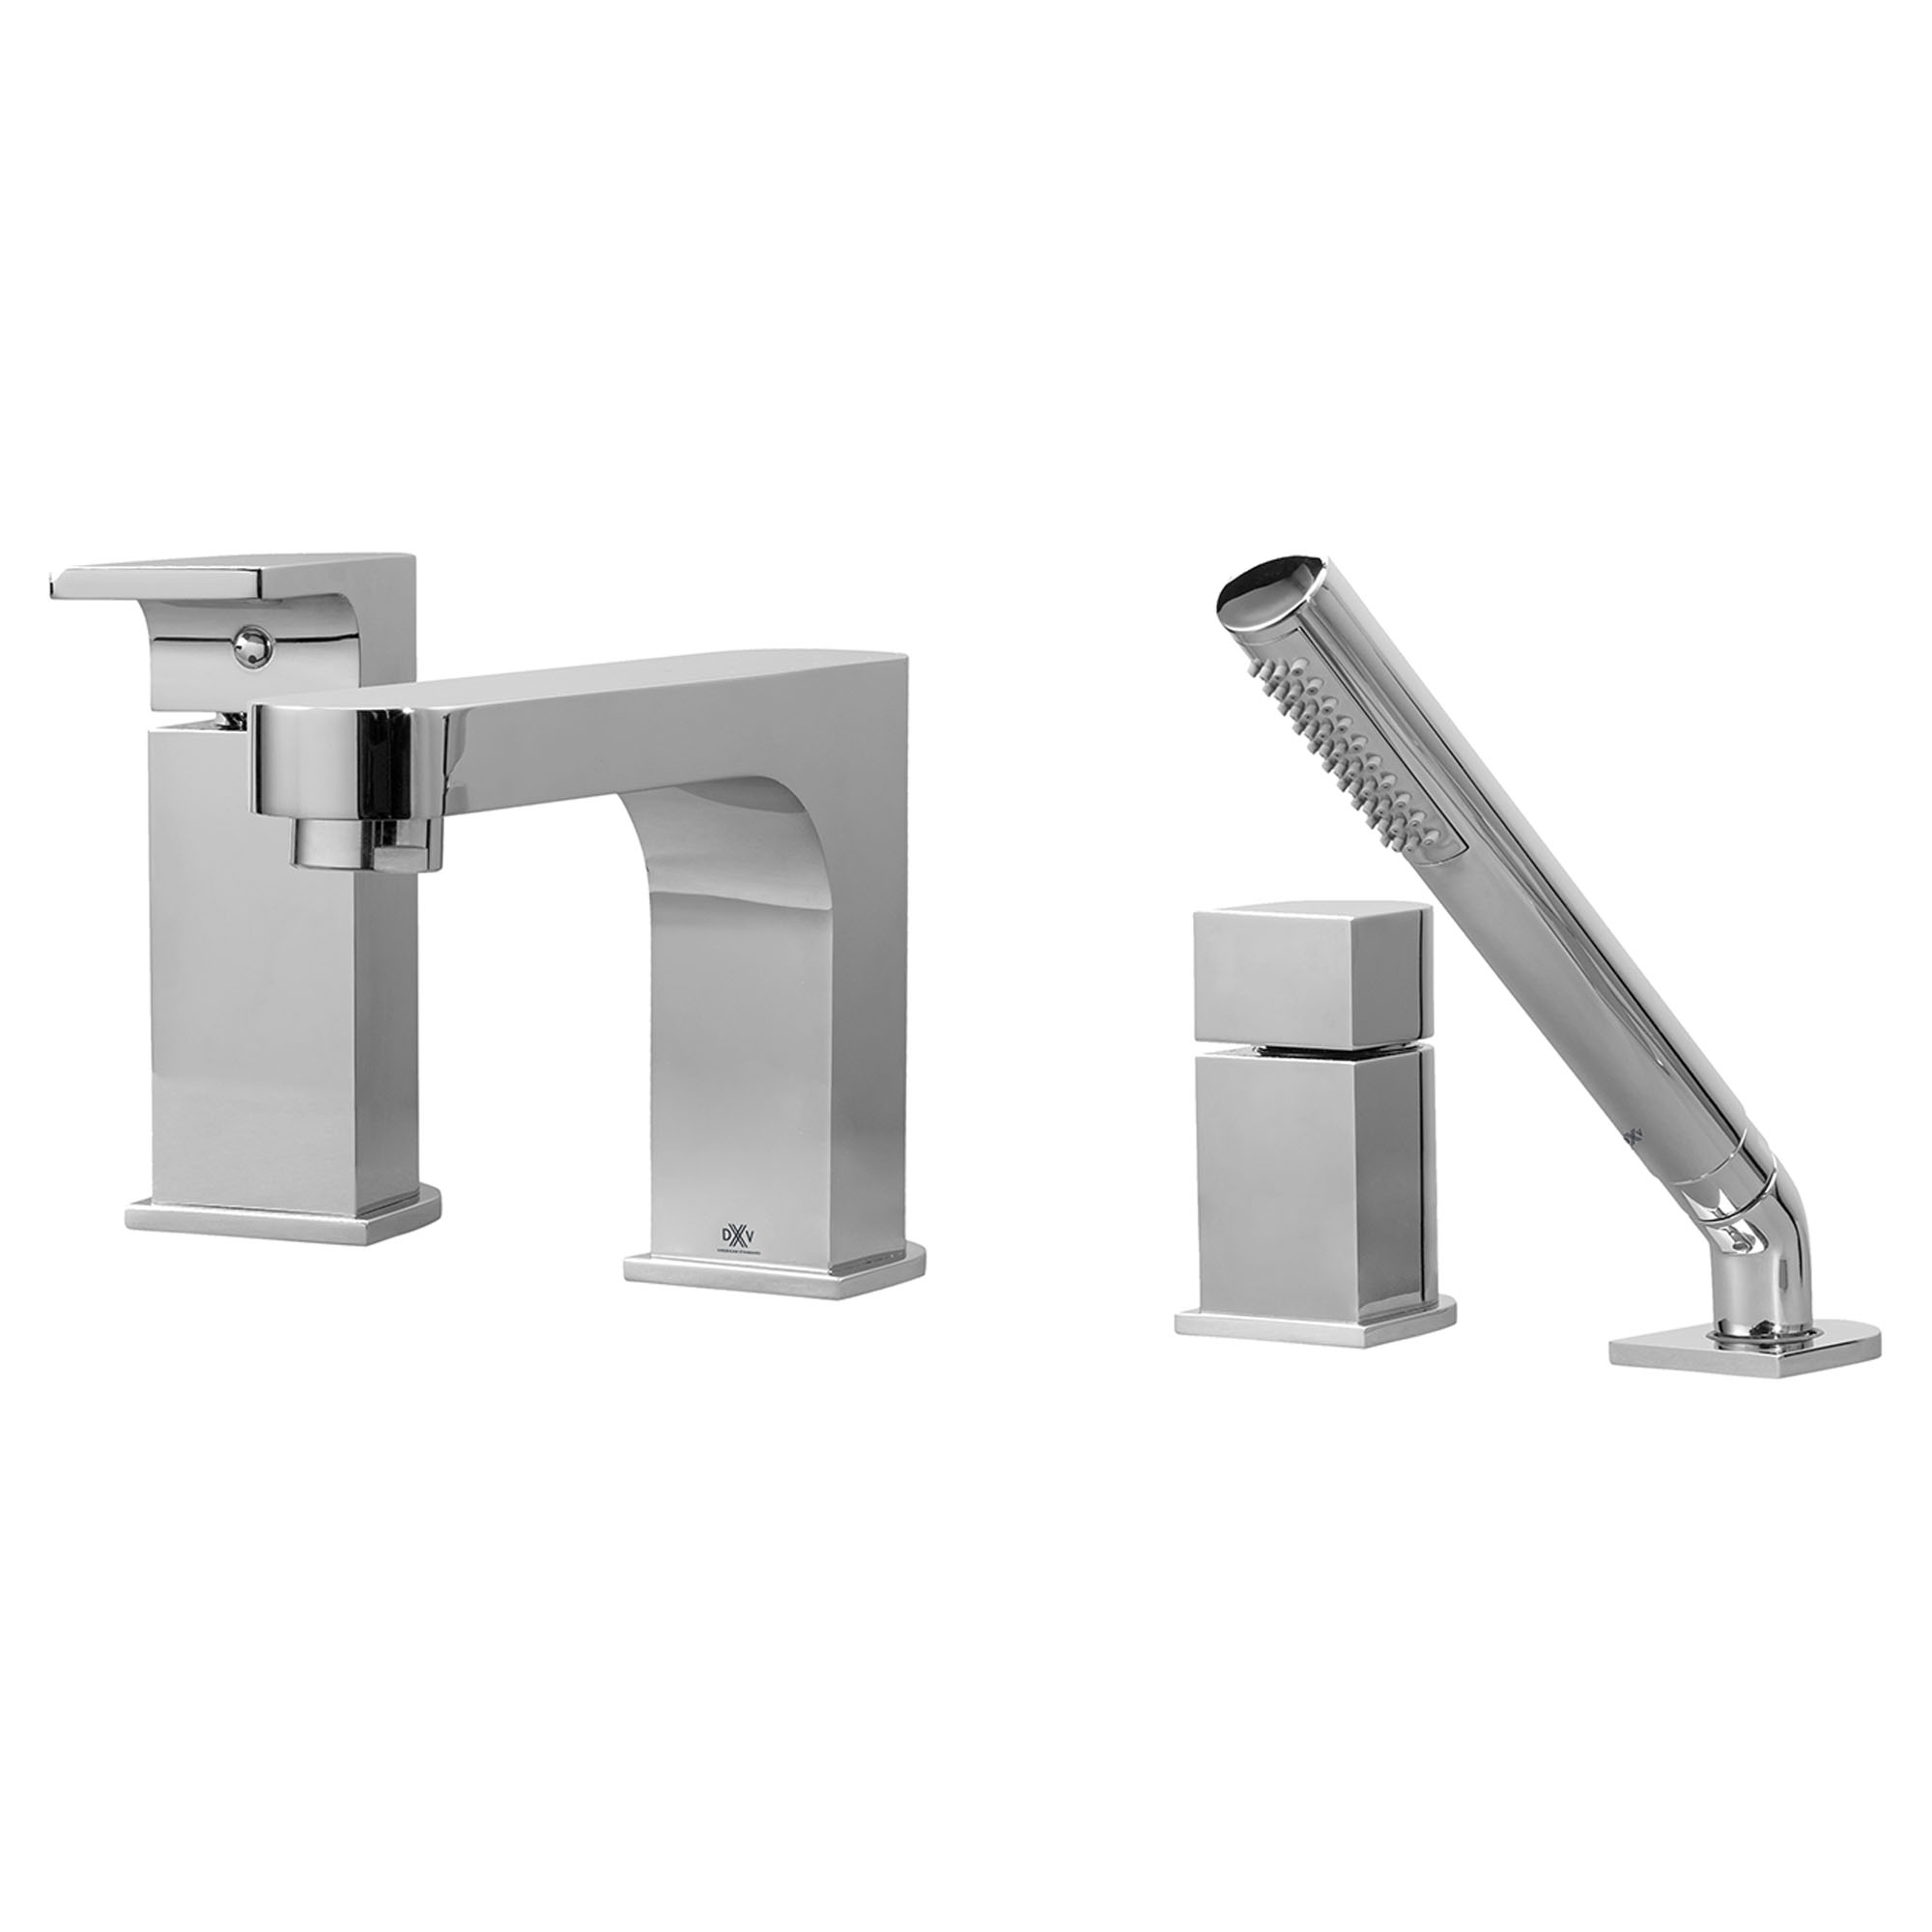 Equility® Single Handle Deck Mount Bathtub Faucet with Hand Shower and Lever Handle